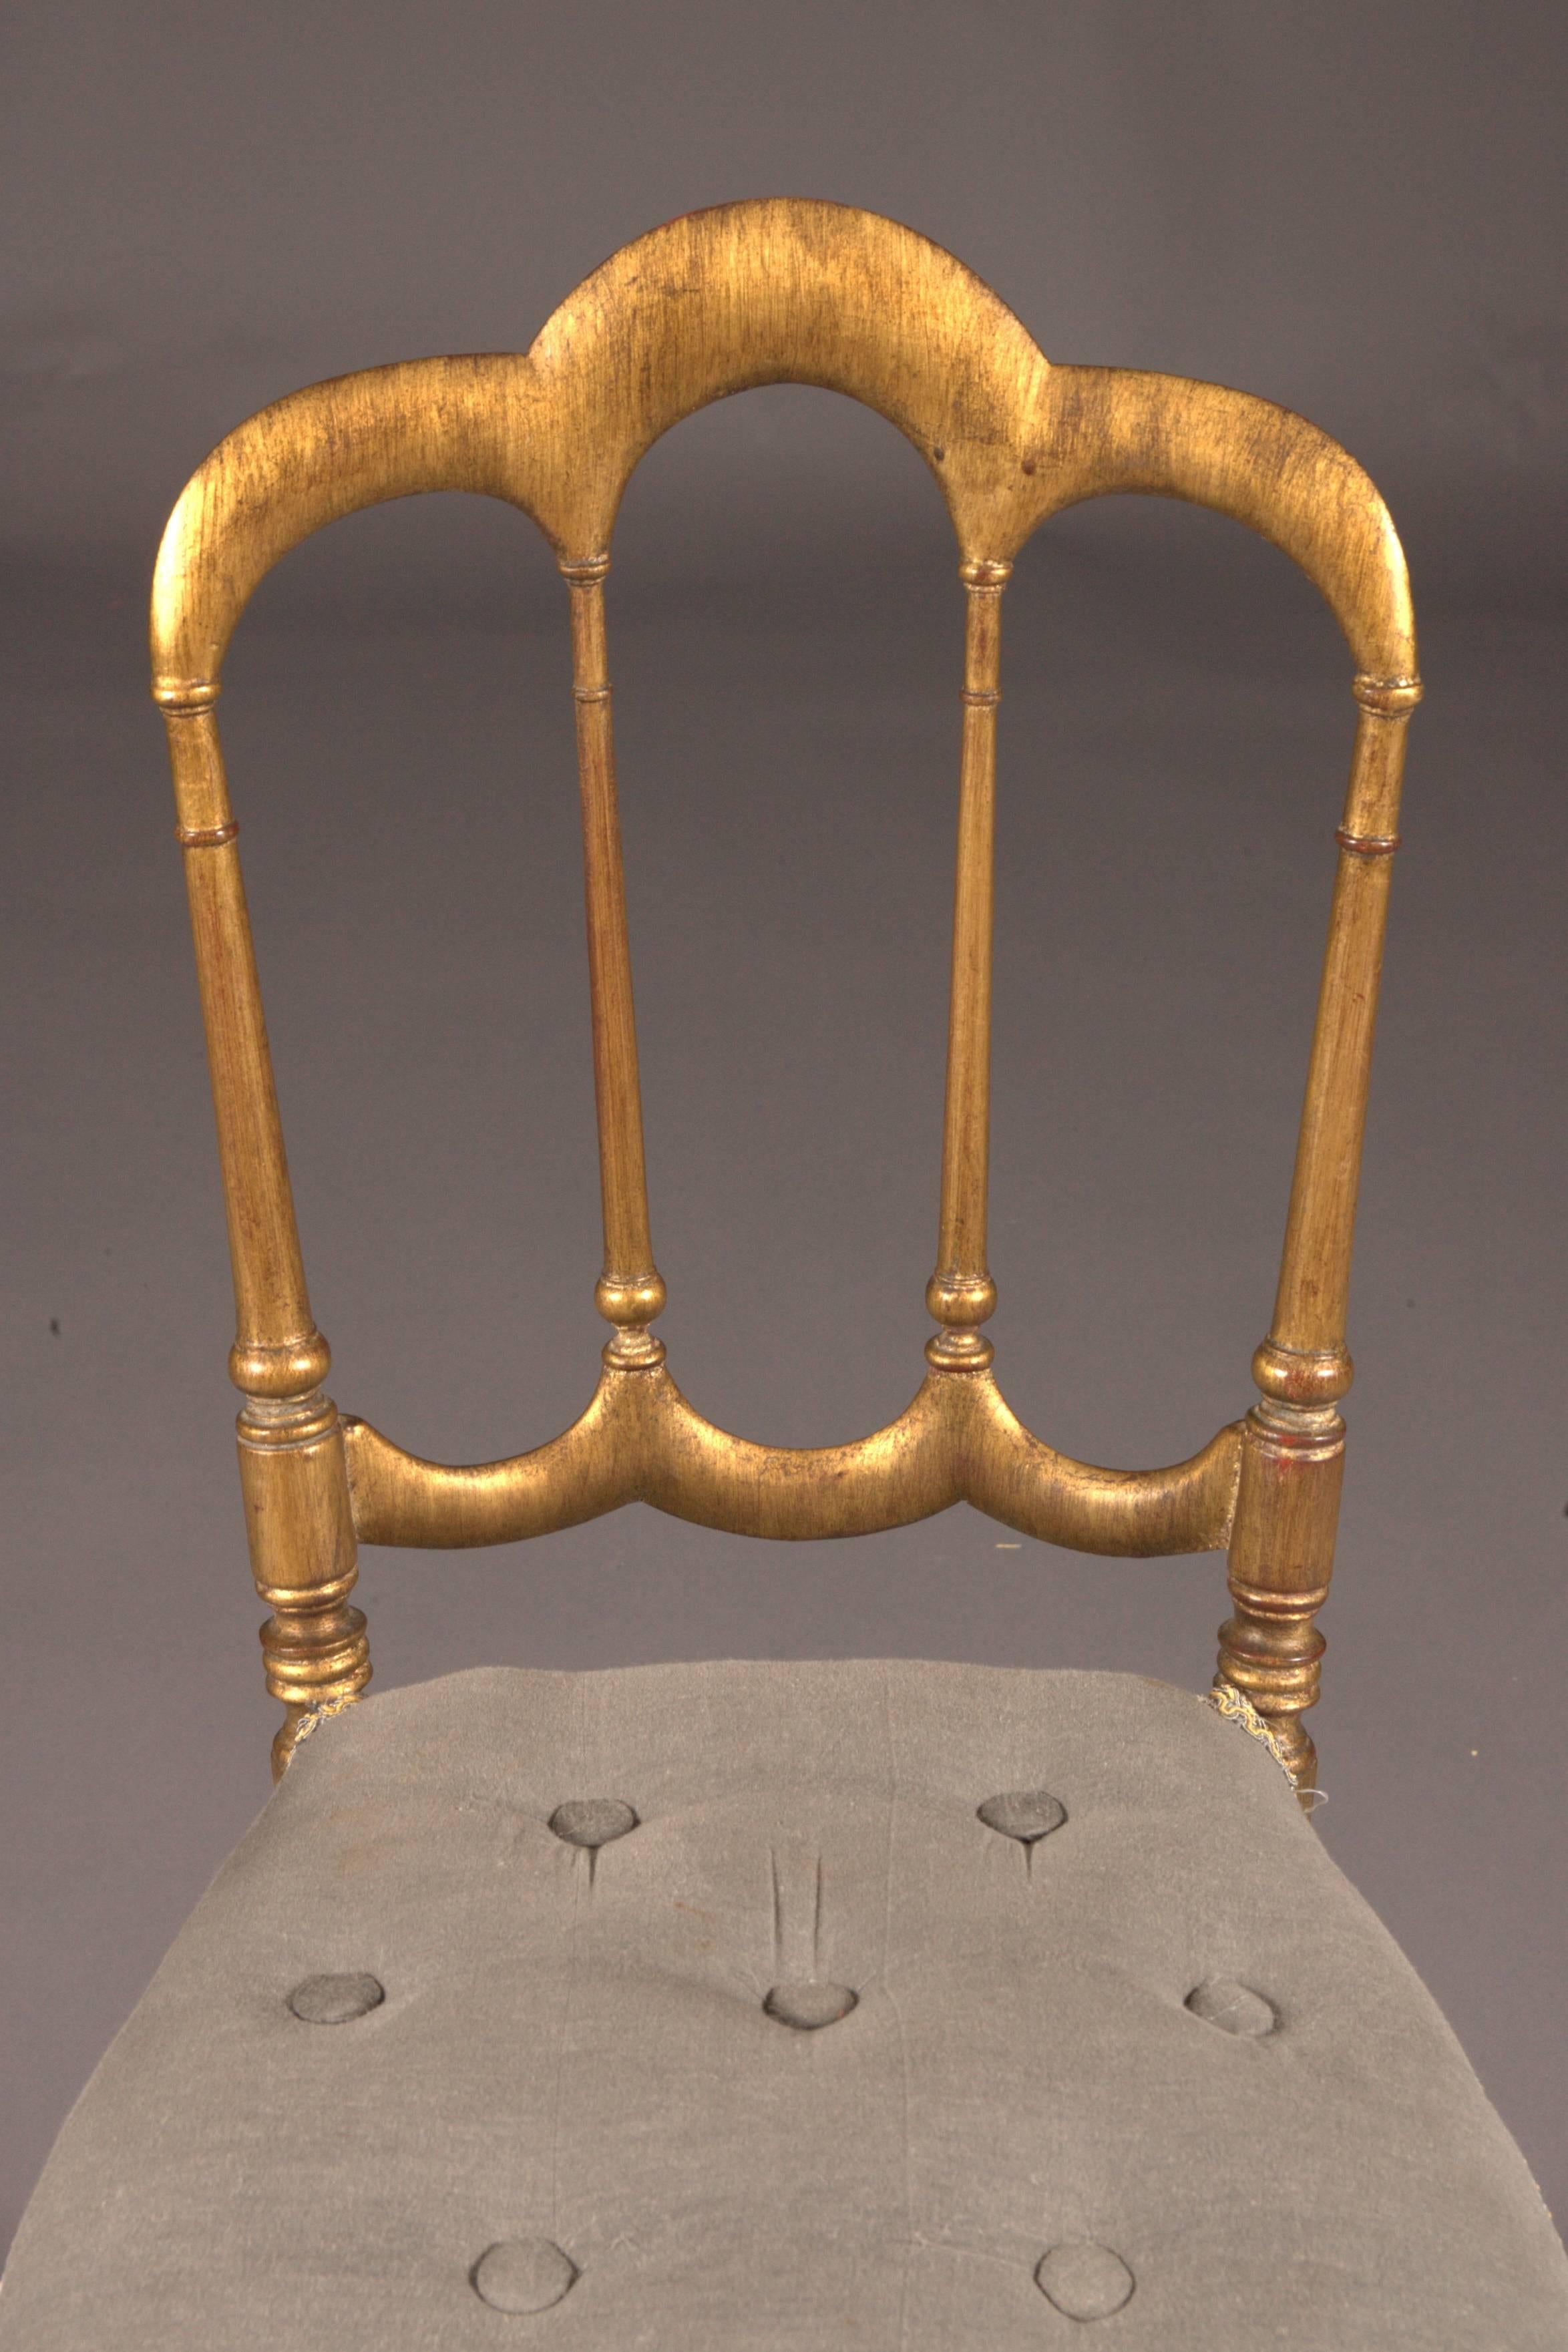 Other Delicate Chair in the Style of the 19th Century